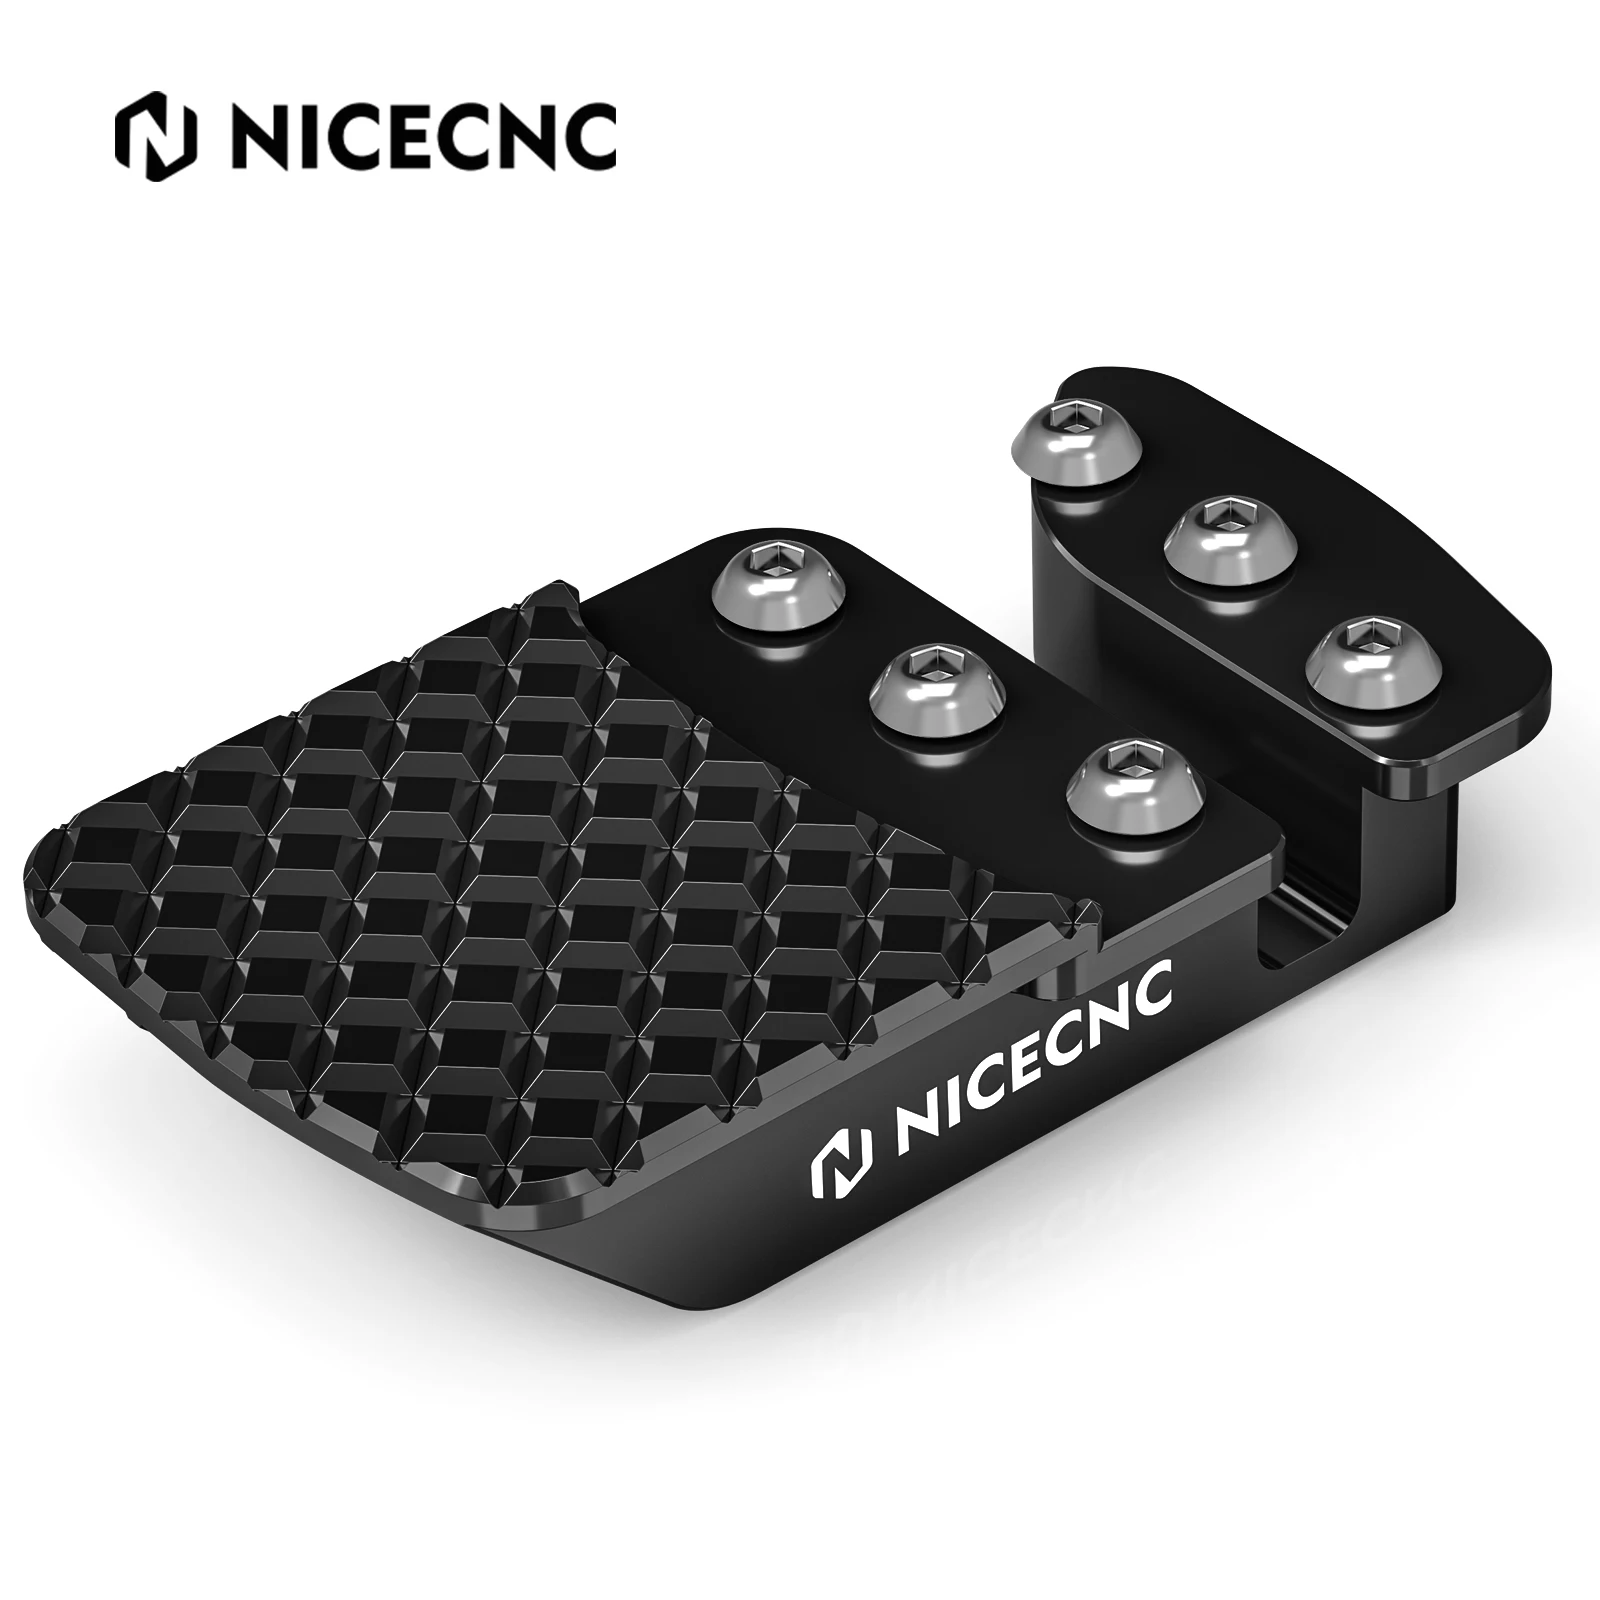 NICECNC X3 Brake Pedal Extender For Can Am Maverick X3 4x4 Turbo DPS Max R RR UTV Accessories CNC-machined 1pc faucet sprayer 360° rotation adjustable kitchen bathroom sink accessories extender water tap saving nozzle connector